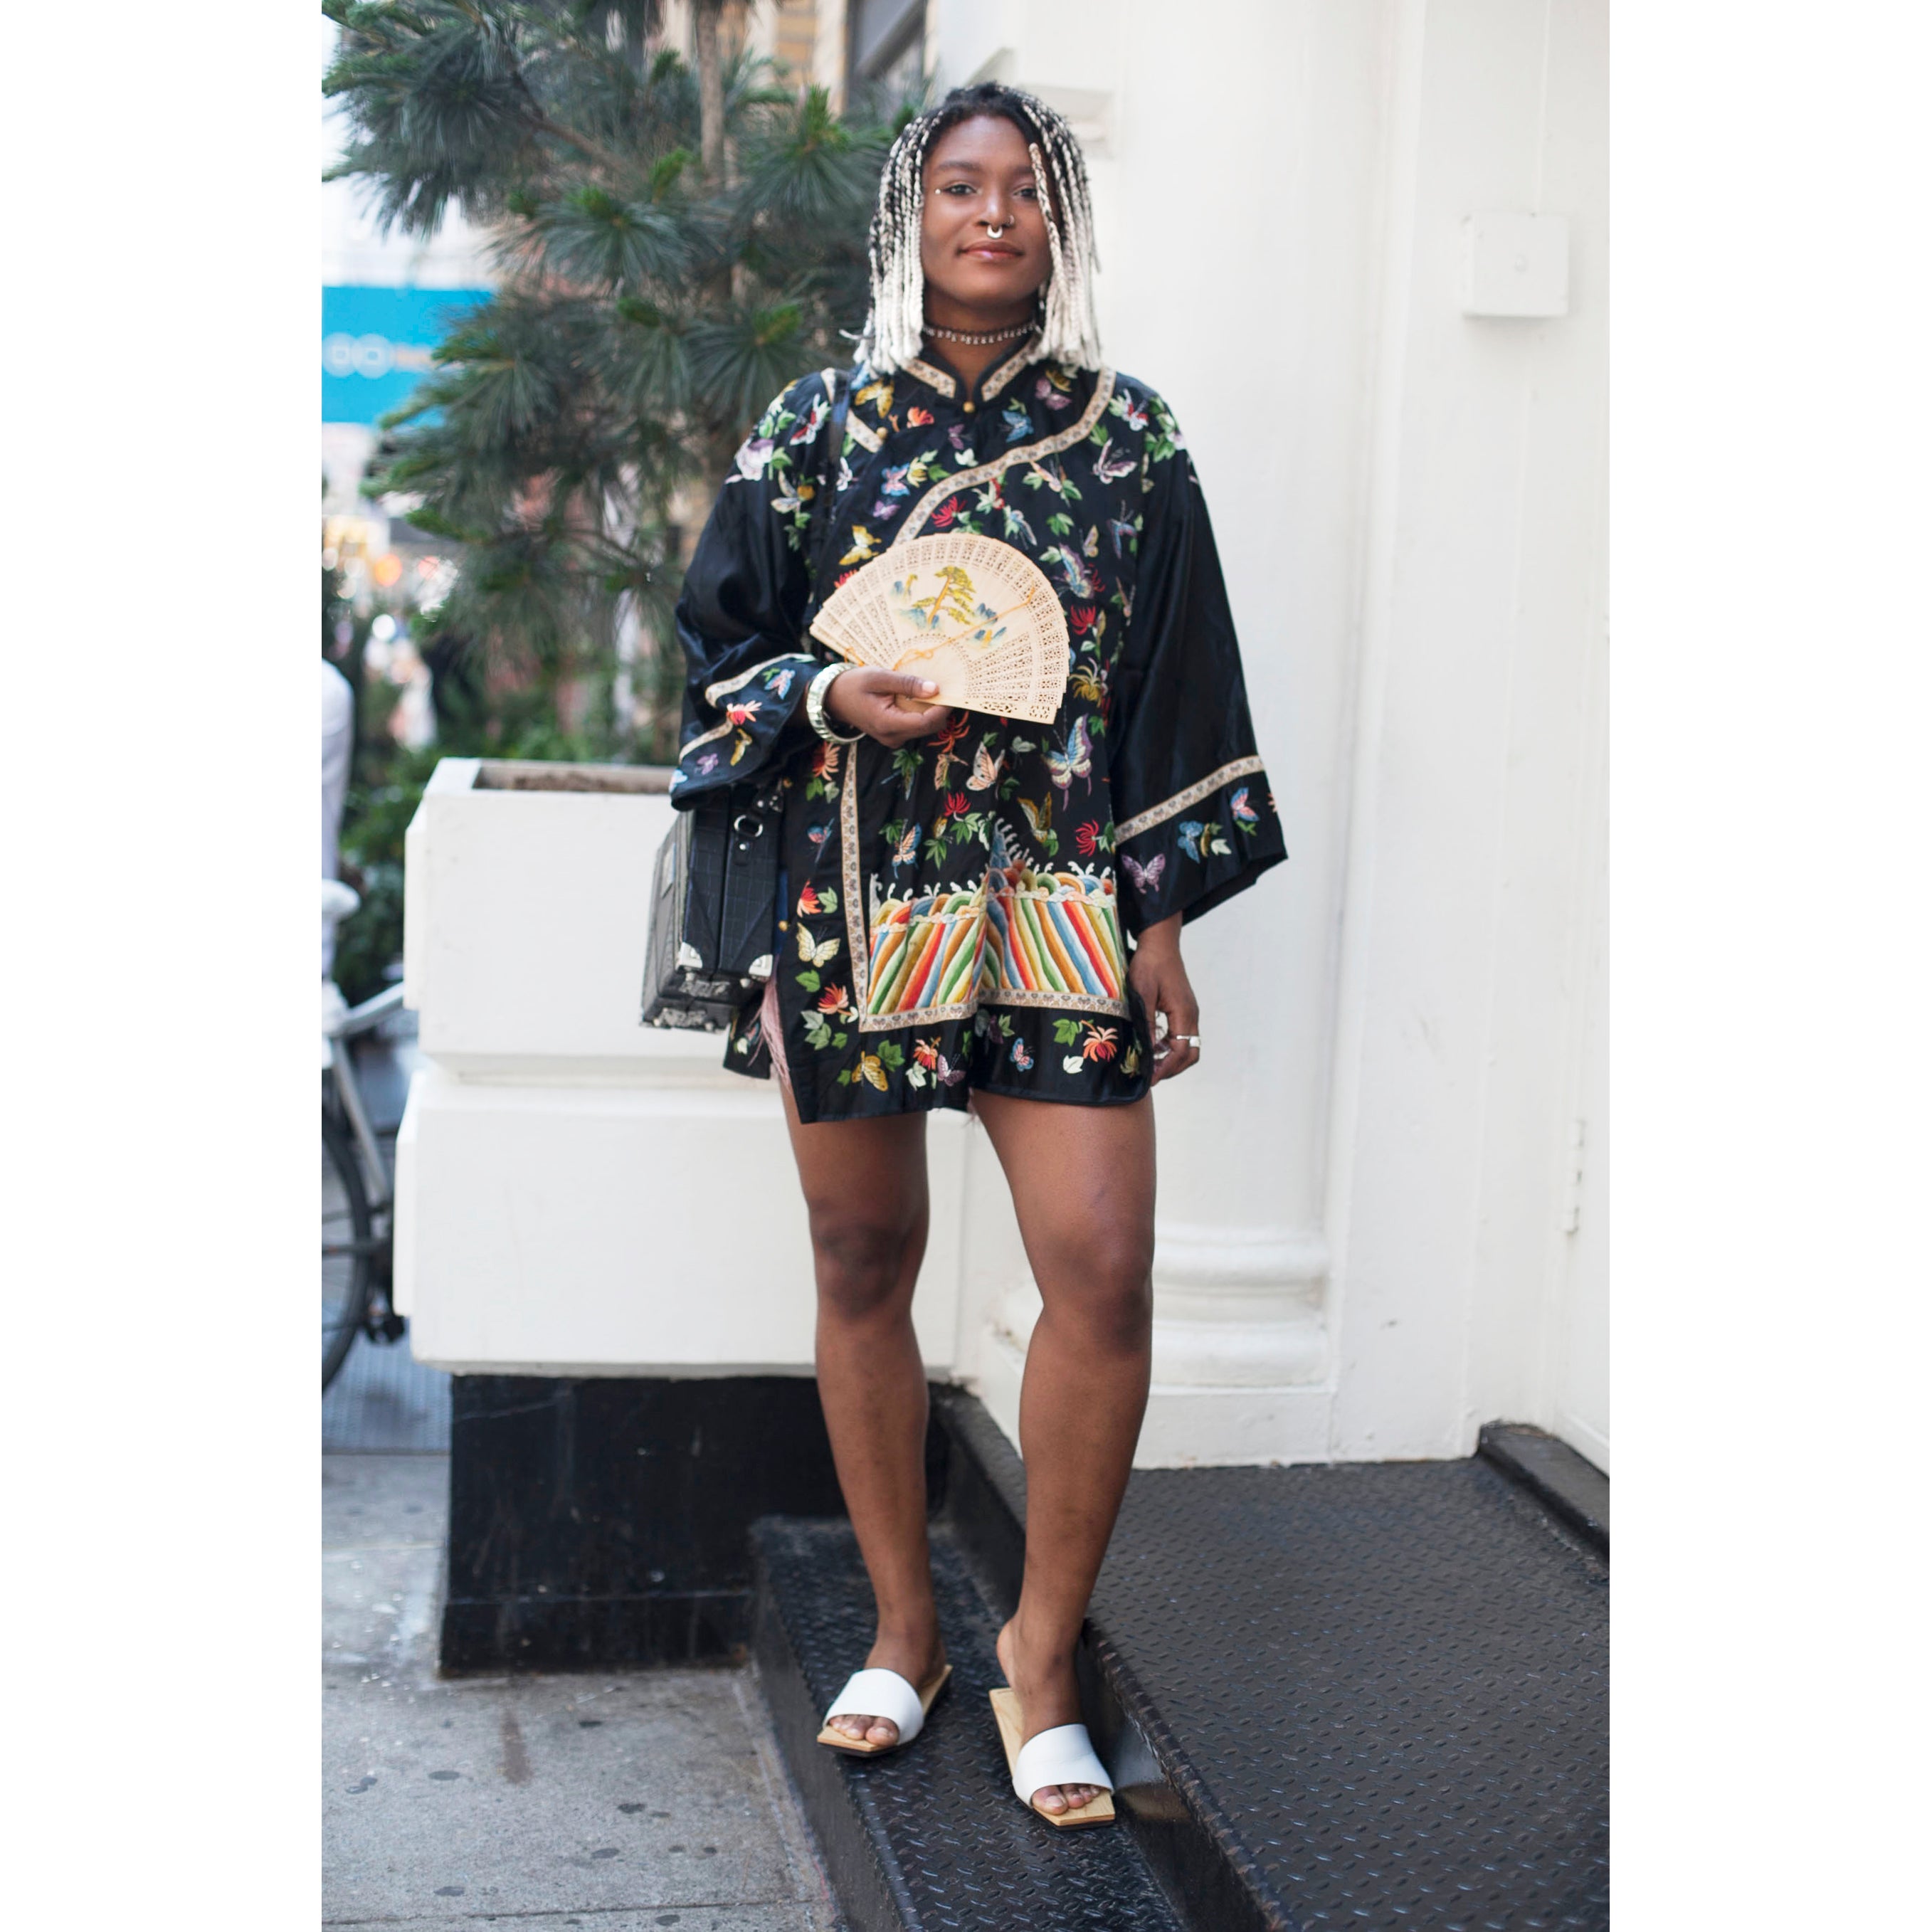 Street Style: Summer In The City
